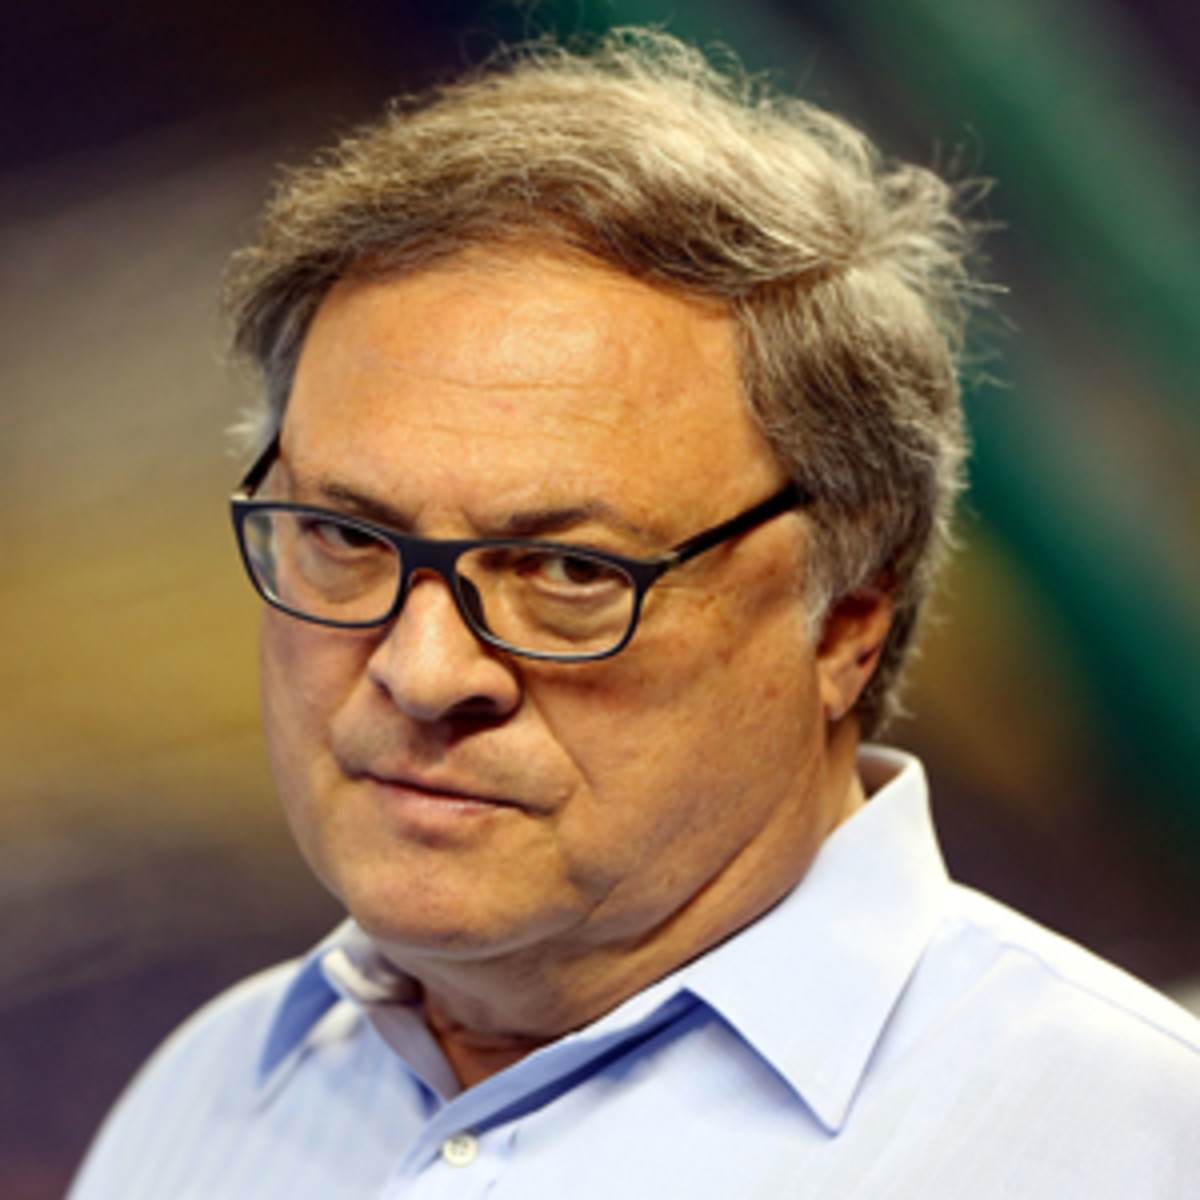 Jeffrey Loria has been criticized by Marlins fans, players and the media following his fire sale last season. (Marc Serota/Getty Images)